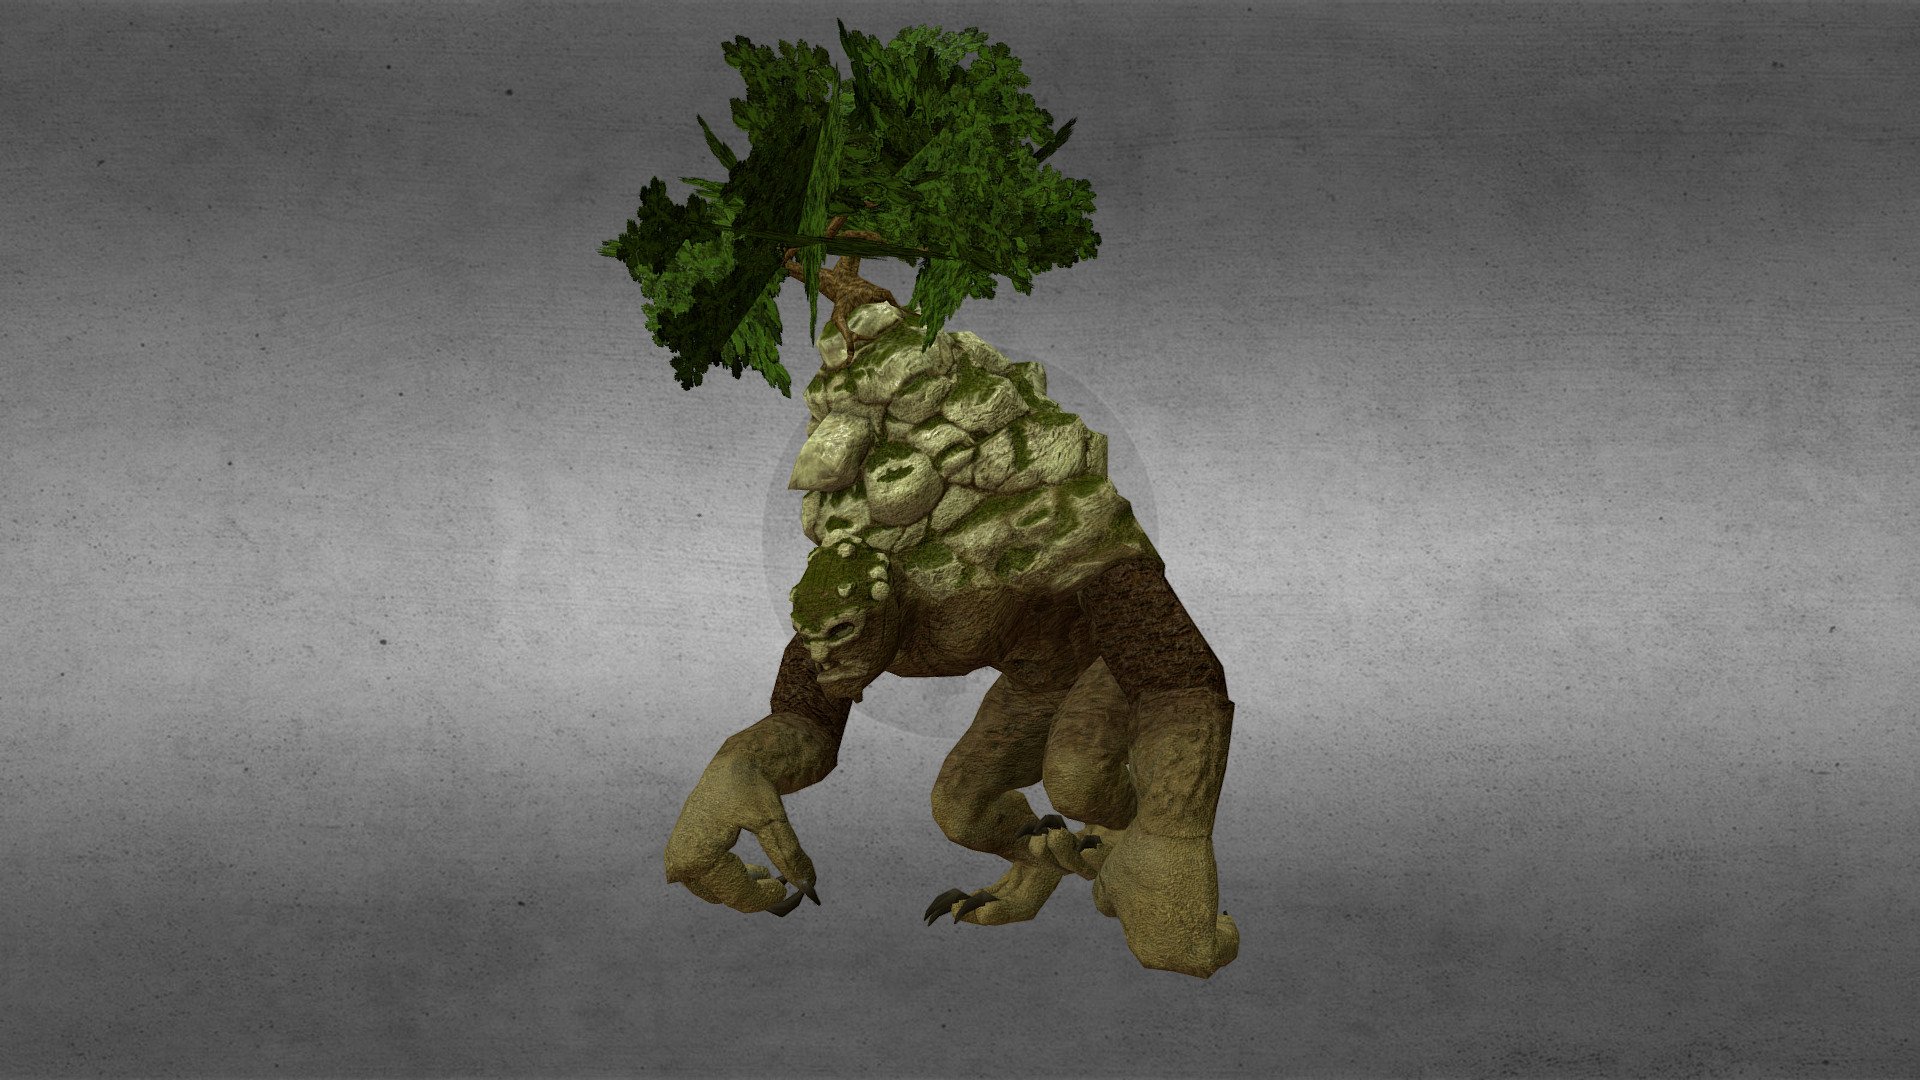 This large creature was created for the wonderful world of Kelgar. ( www.kelgar.org )

The model is rigged and animated and comes with diffuse texture and normal map and ambient occllusion map.
Ready to use ingame.

http://opengameart.org/content/forest-monster - Forest-monster-final - 3D model by CDmir 3d model